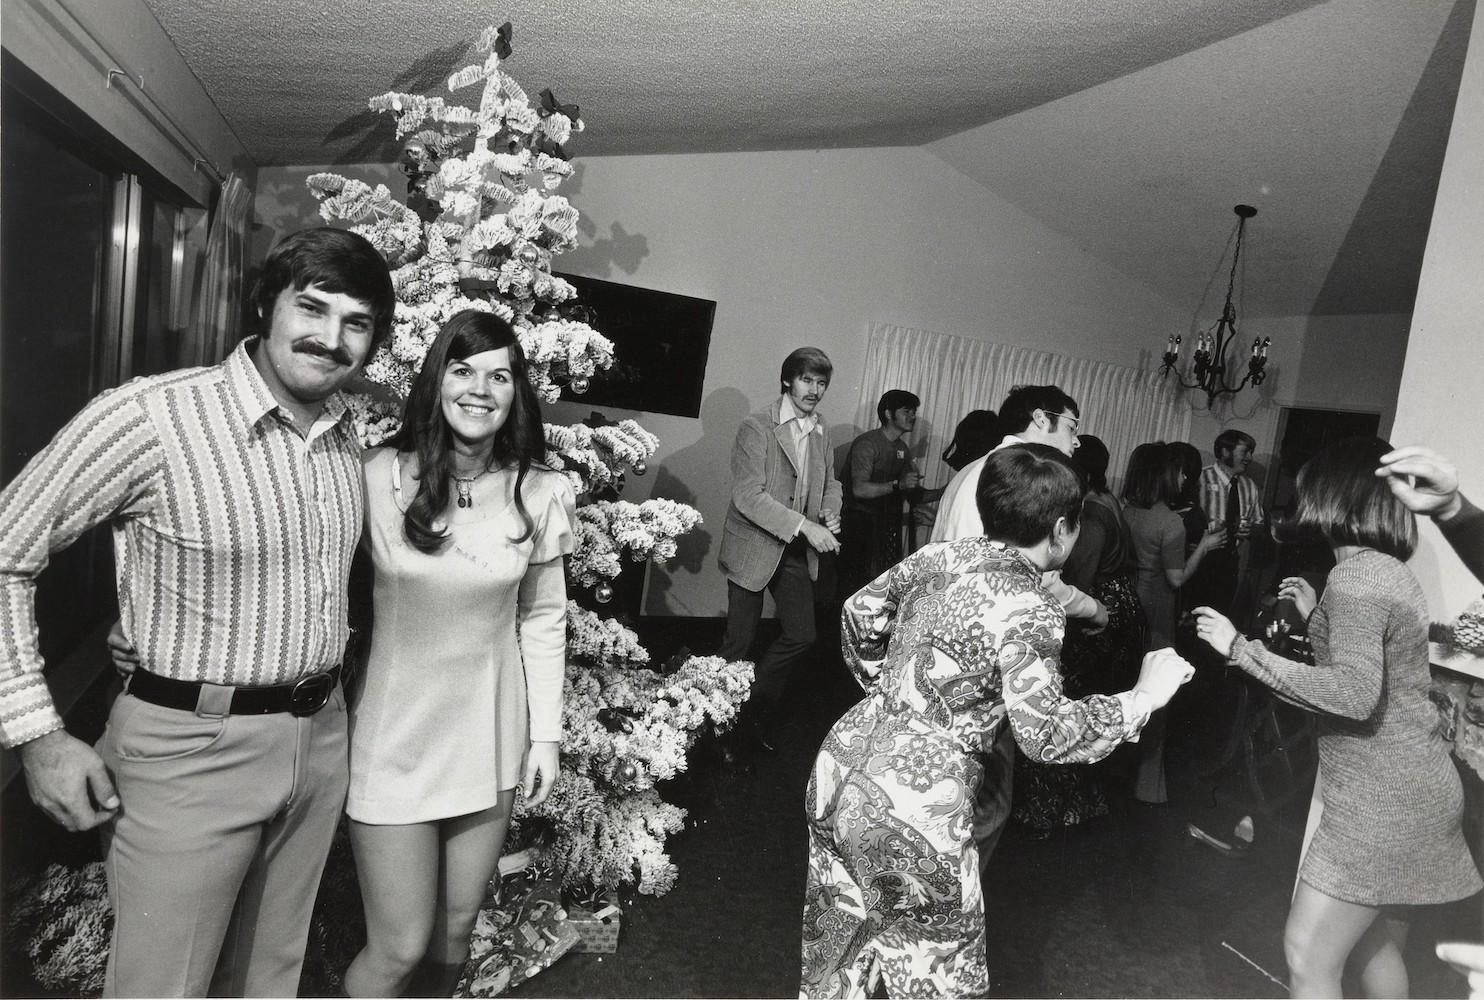 Bill Owens Black and White Photograph - We really enjoy getting together, from Suburbia